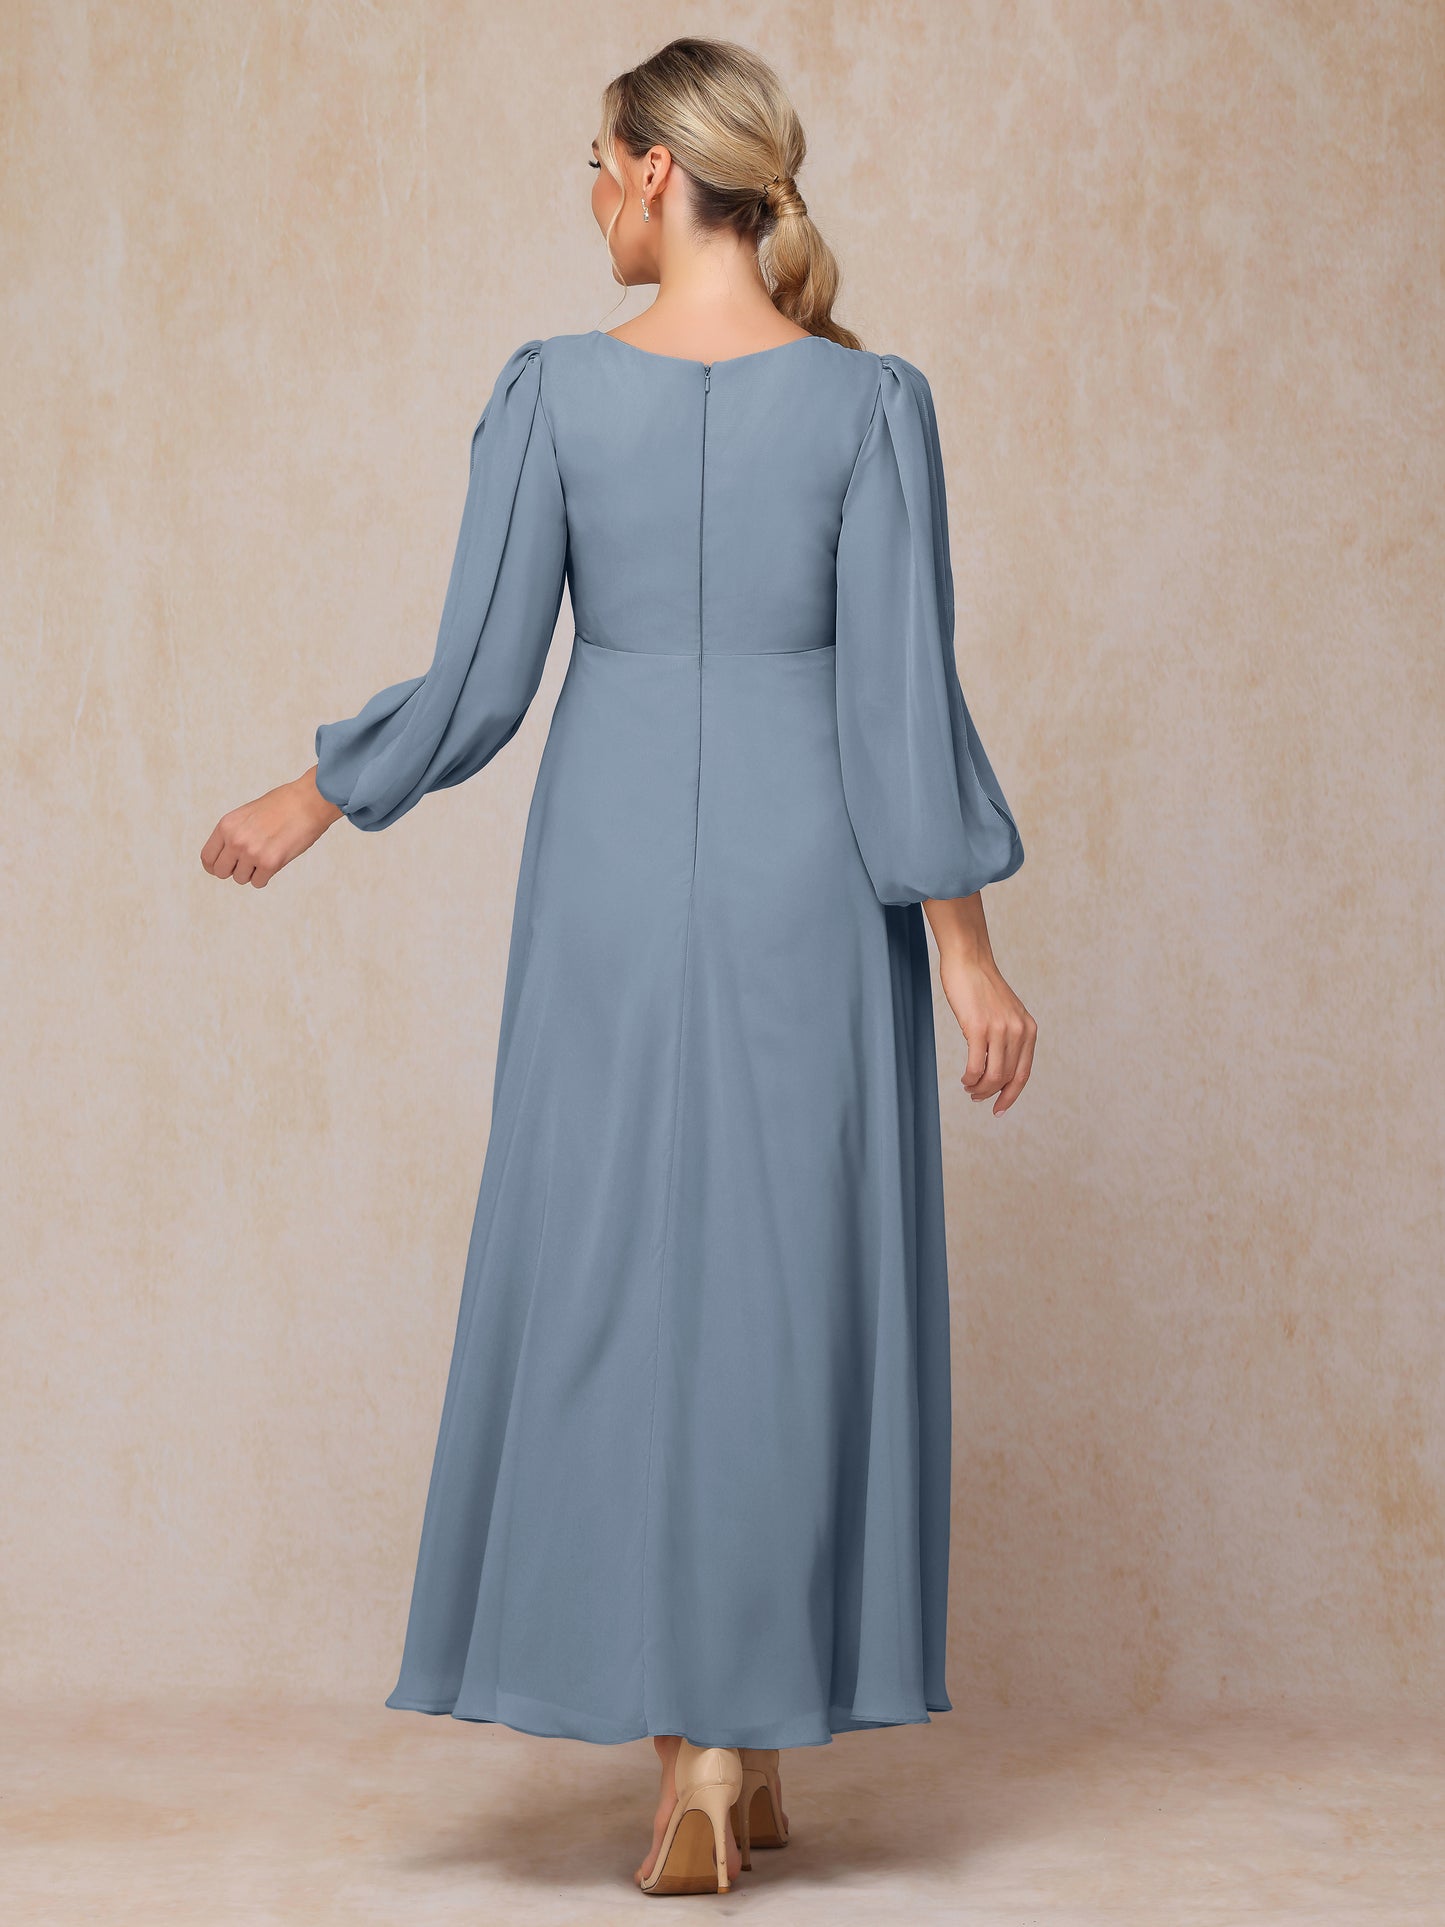 Long Sleeves V Neck Ankle Length Chiffon Mother Of The Bride Dress